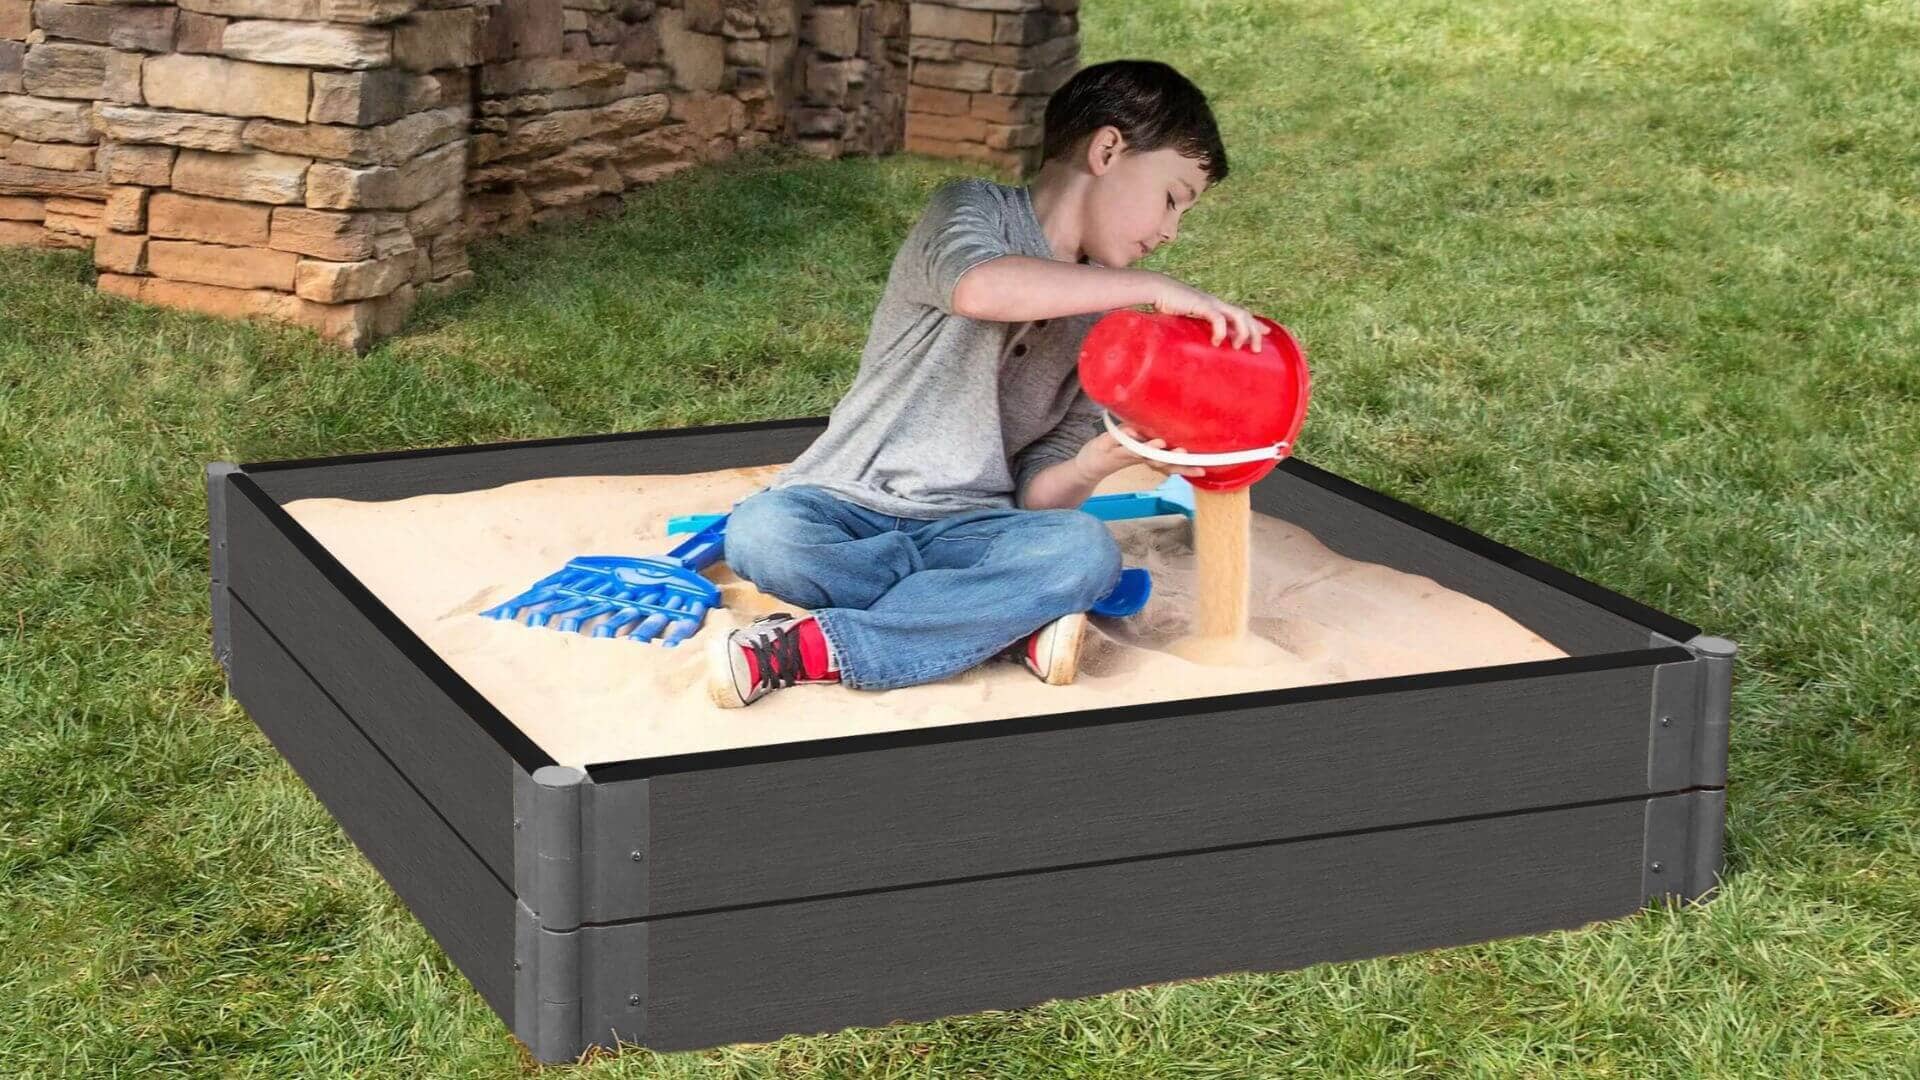 4' x 4' Composite Square Sandbox - 2 Inch Profile Sandboxes Frame It All Weathered Wood 2 Inch 11" Sandbox Only